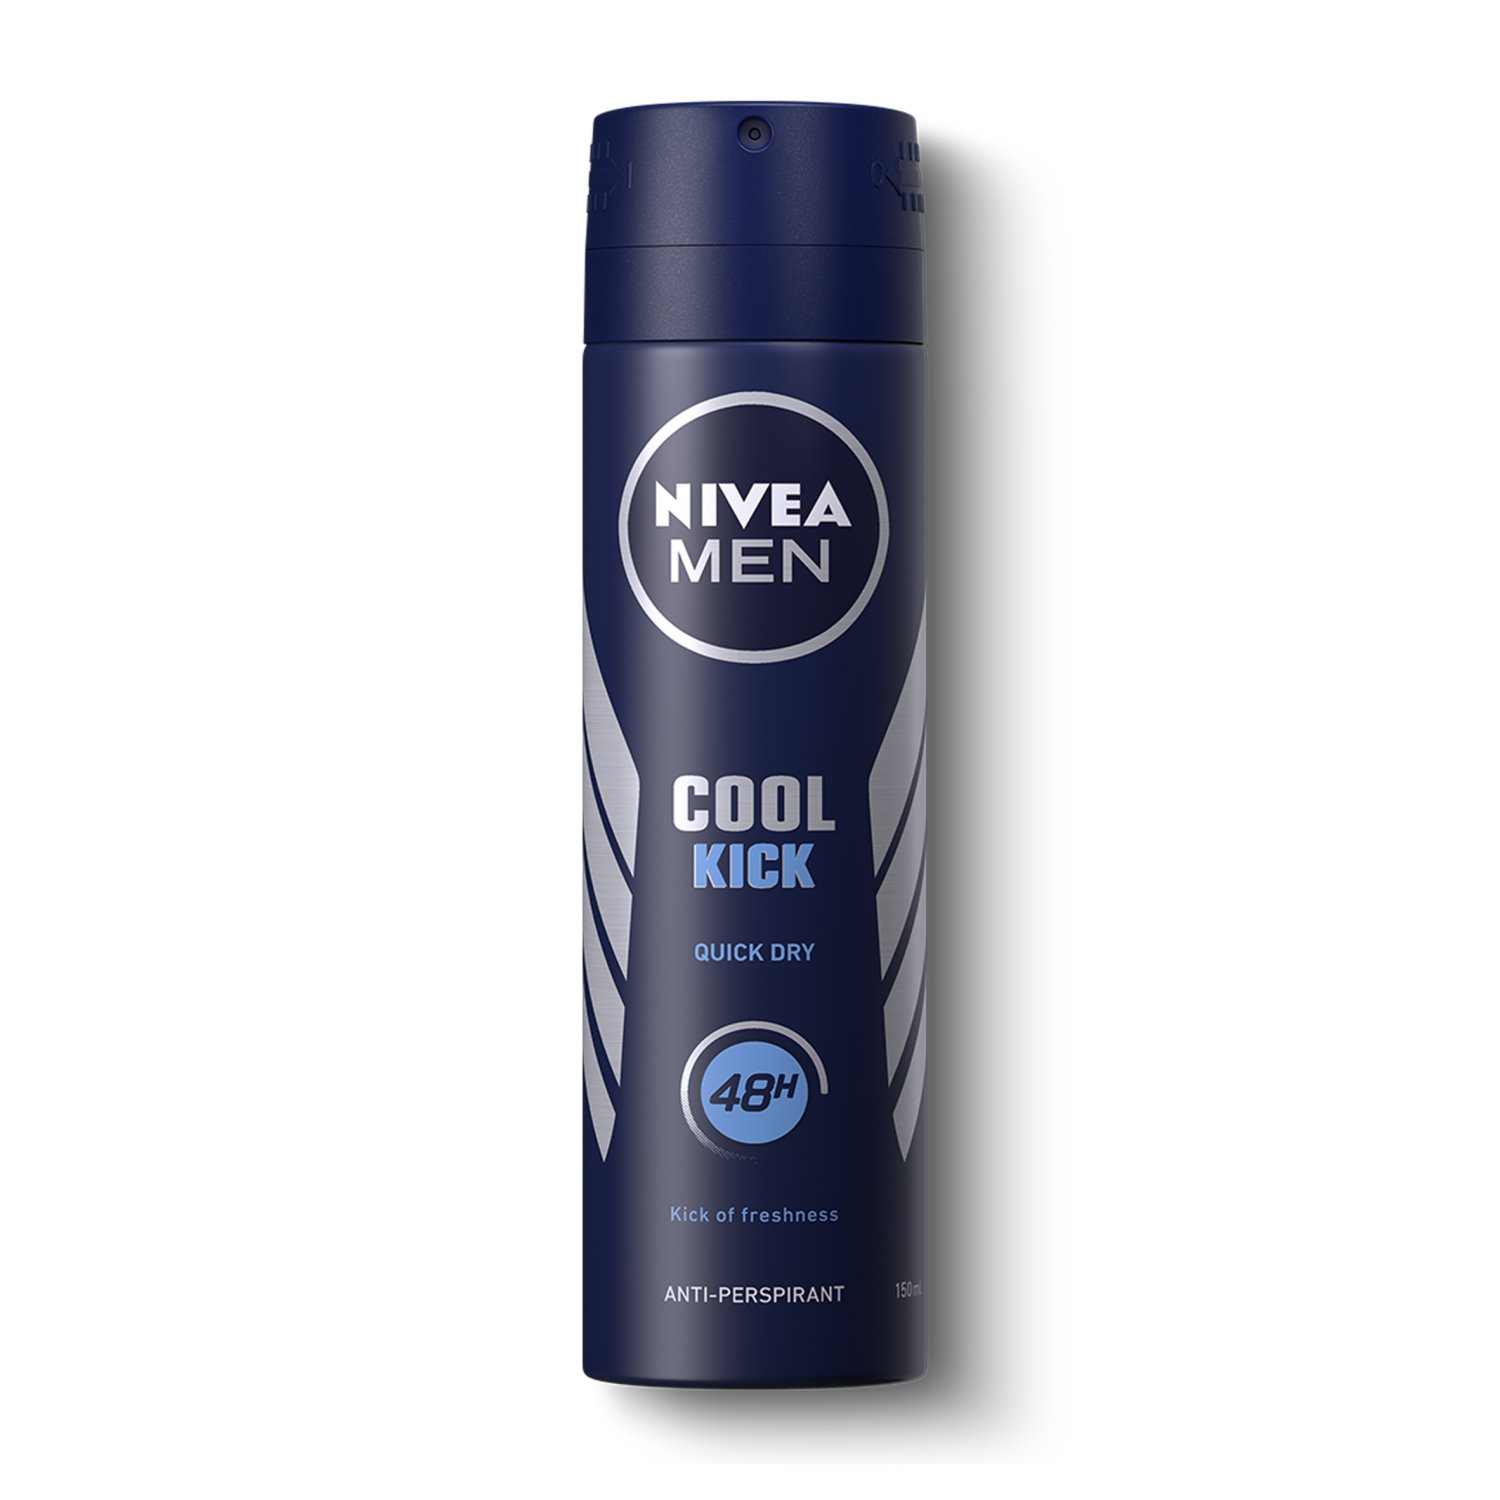 
NIVEA MEN Cook Kick Anti-Perspirant Deodorant instantly offers revitalising freshness while effectively protecting you from sweat and body odour all day long. The mild Cool-Care formula revives your body and regulates perspiration effectively. This formula offers 48 hour anti-perspirant protection with a fresh and masculine scent. For men who want to experience instant freshness and reliable protection. The deodorant is skin tolerance dermatologically approved, 0% ethyl alcohol. This product is available in different sizes and formats. 